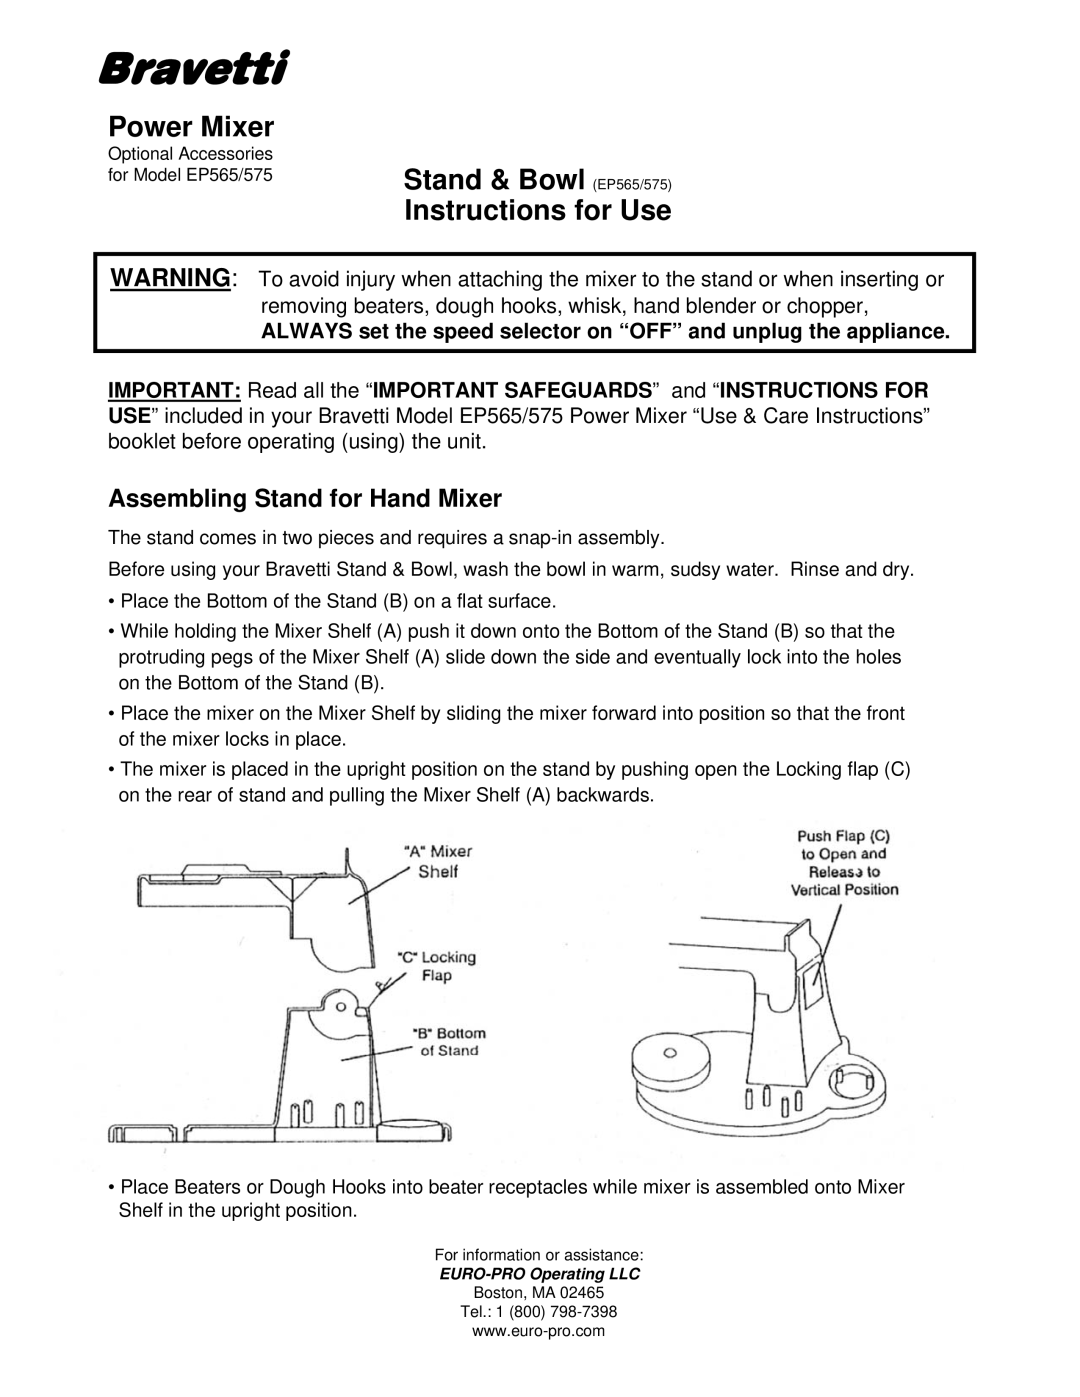 Bravetti EP565, EP575 manual Bravetti, Power Mixer, Instructions for Use, Assembling Stand for Hand Mixer 